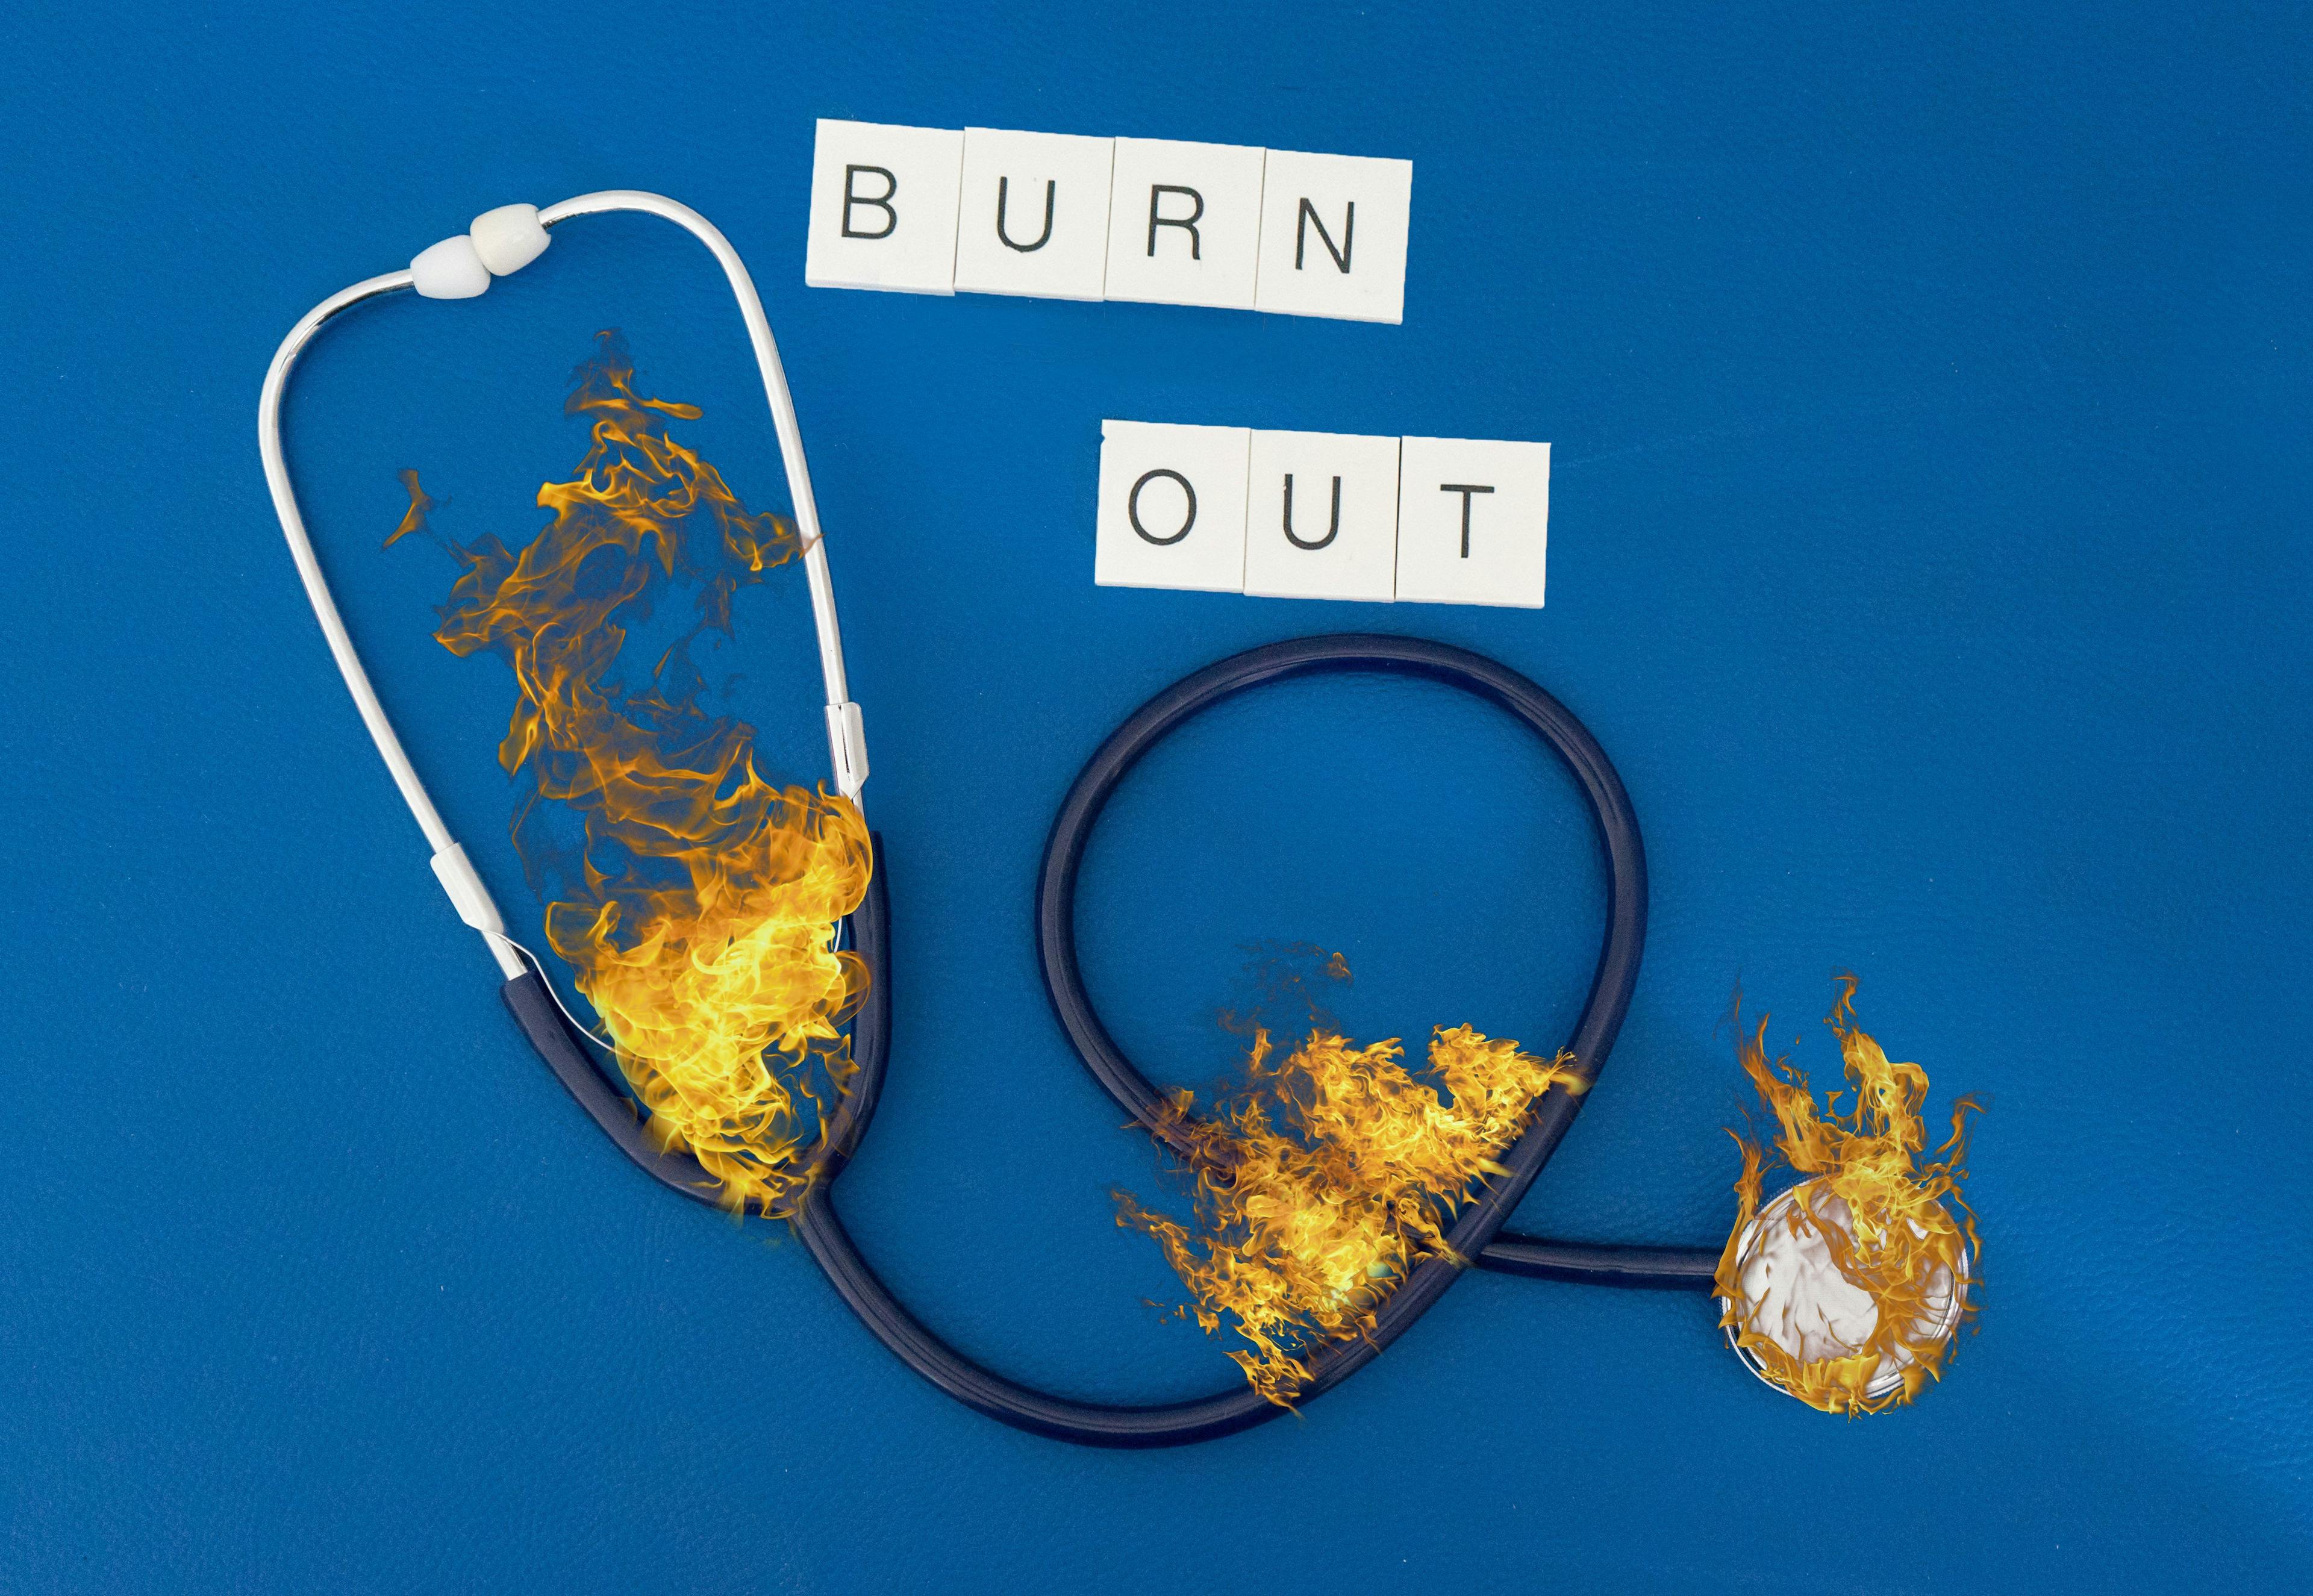 Will new payment models relieve physician burnout?